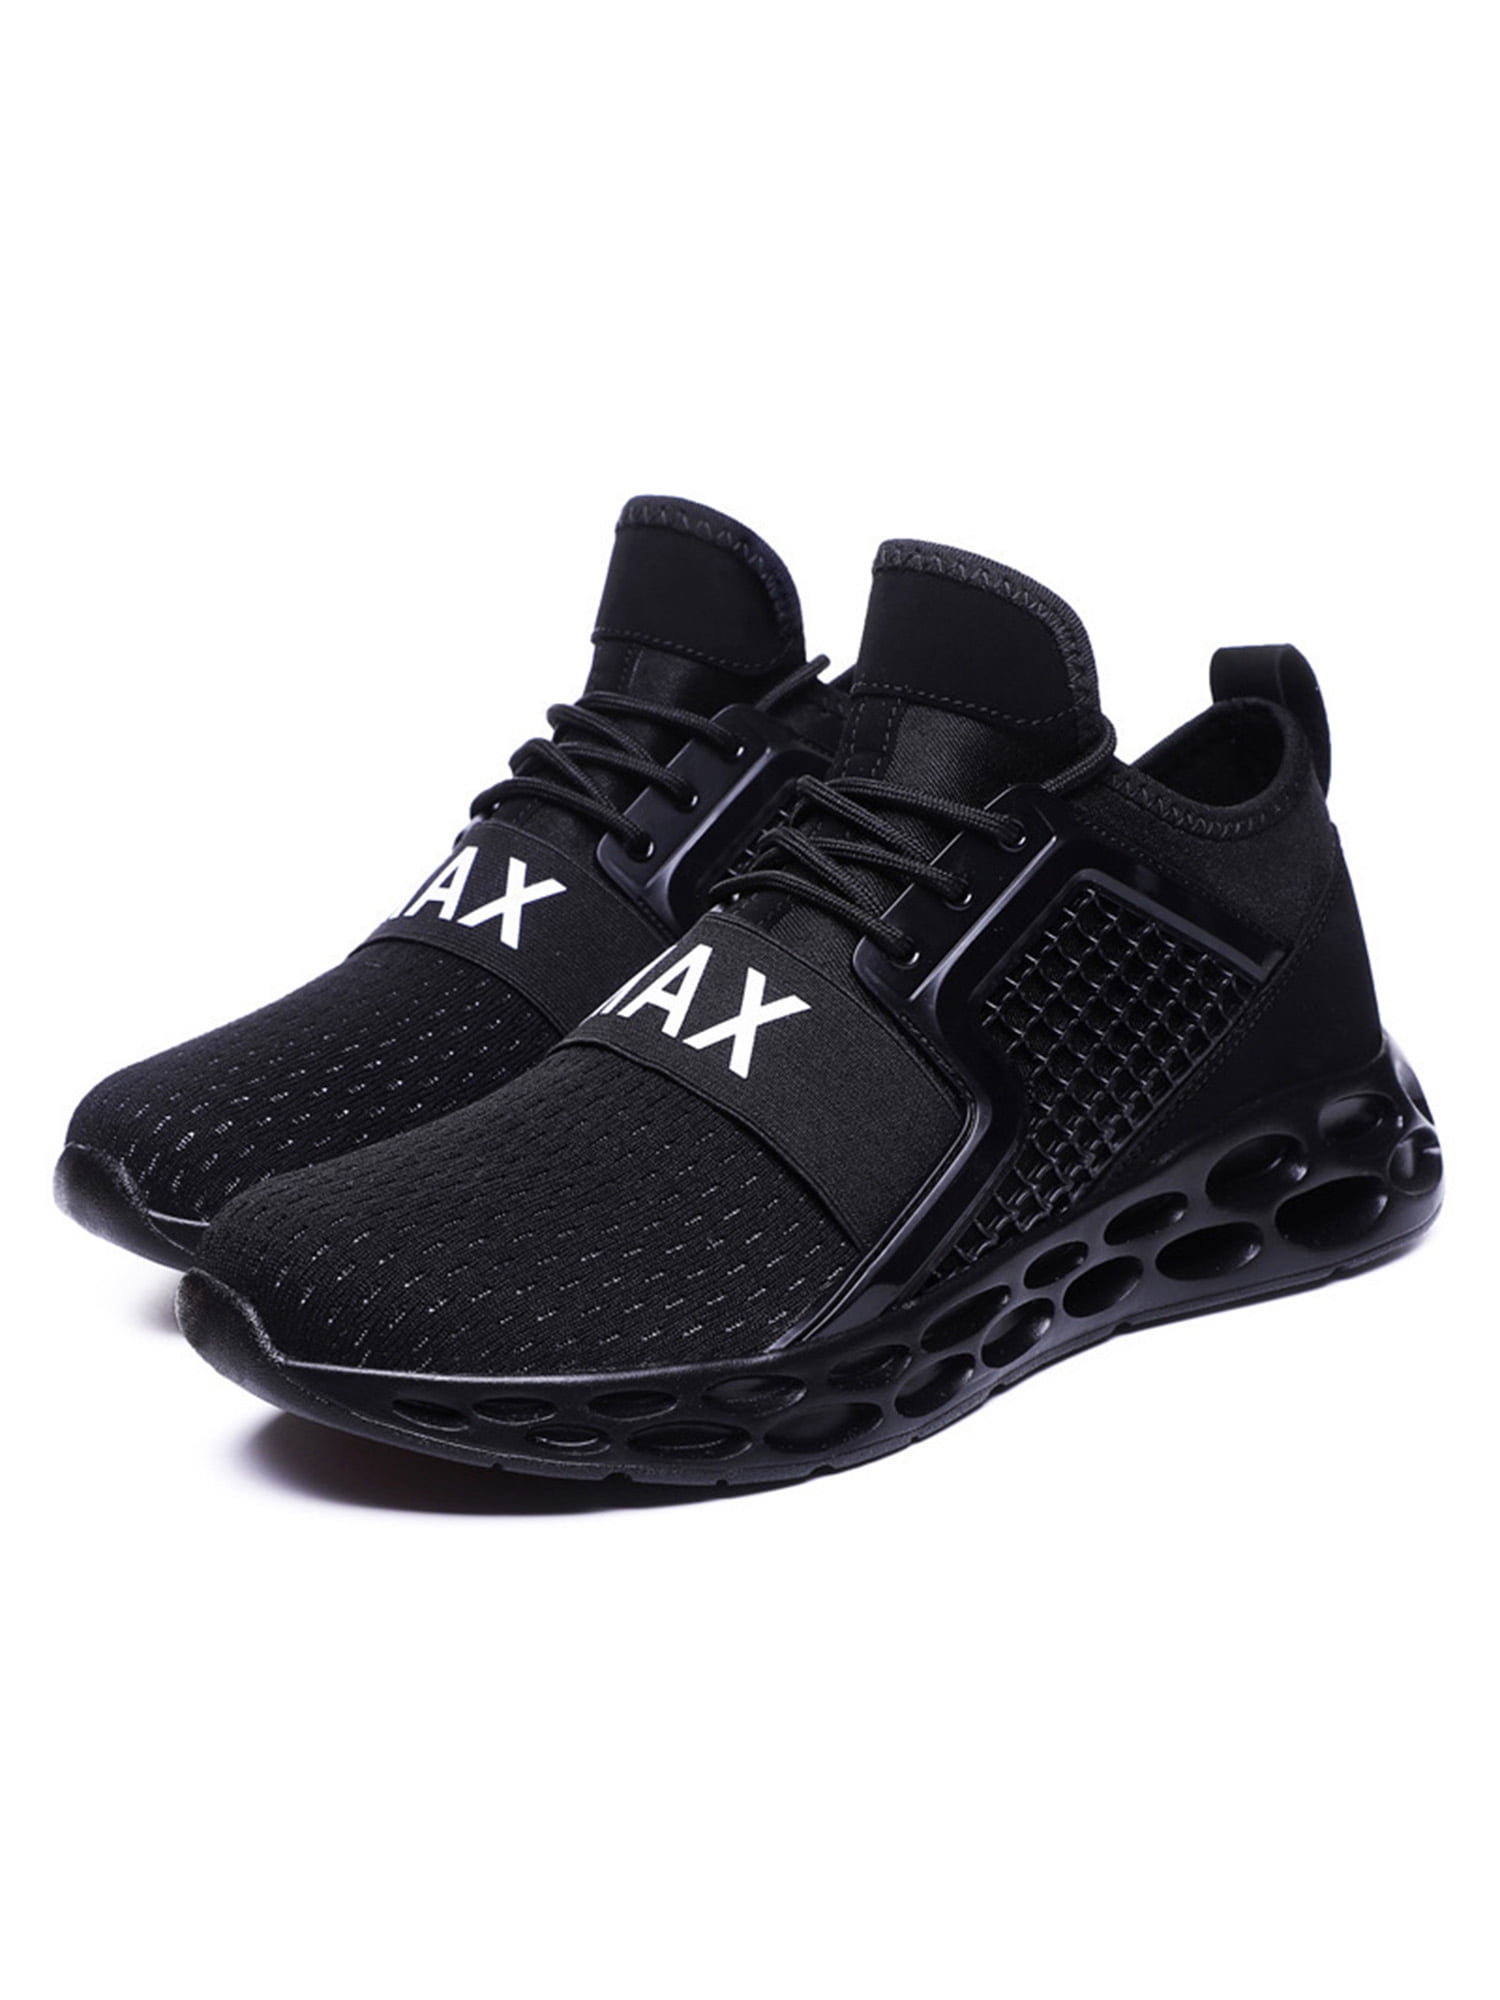 Men's Athletic Running Casual Sneakers Fashion Sports Tennis Shoes Walking Gym